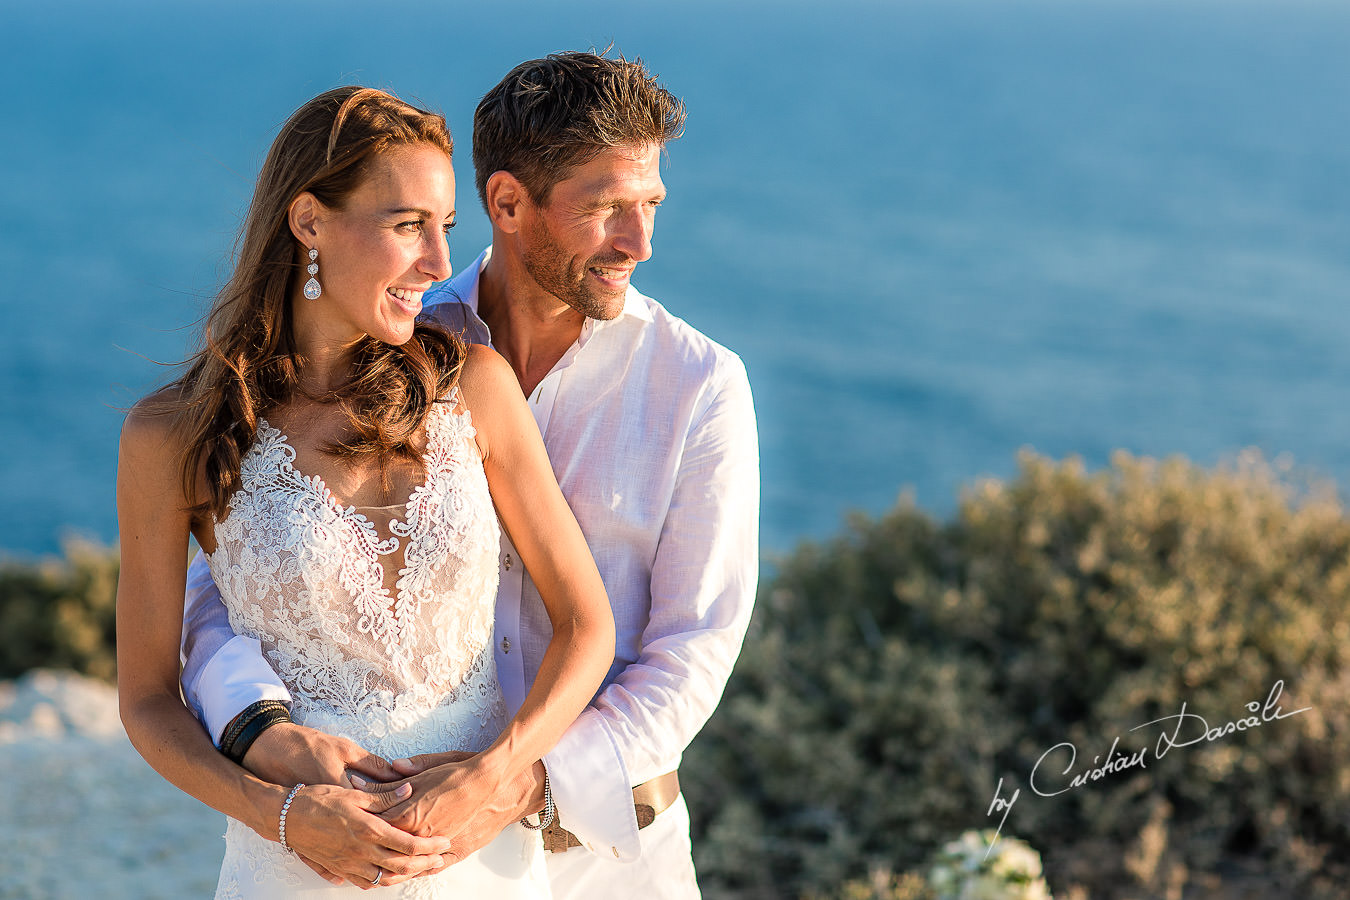 After wedding photoshoot captured by Cyprus Photographer Cristian Dascalu during a beautiful wedding at Cap St. George in Paphos.